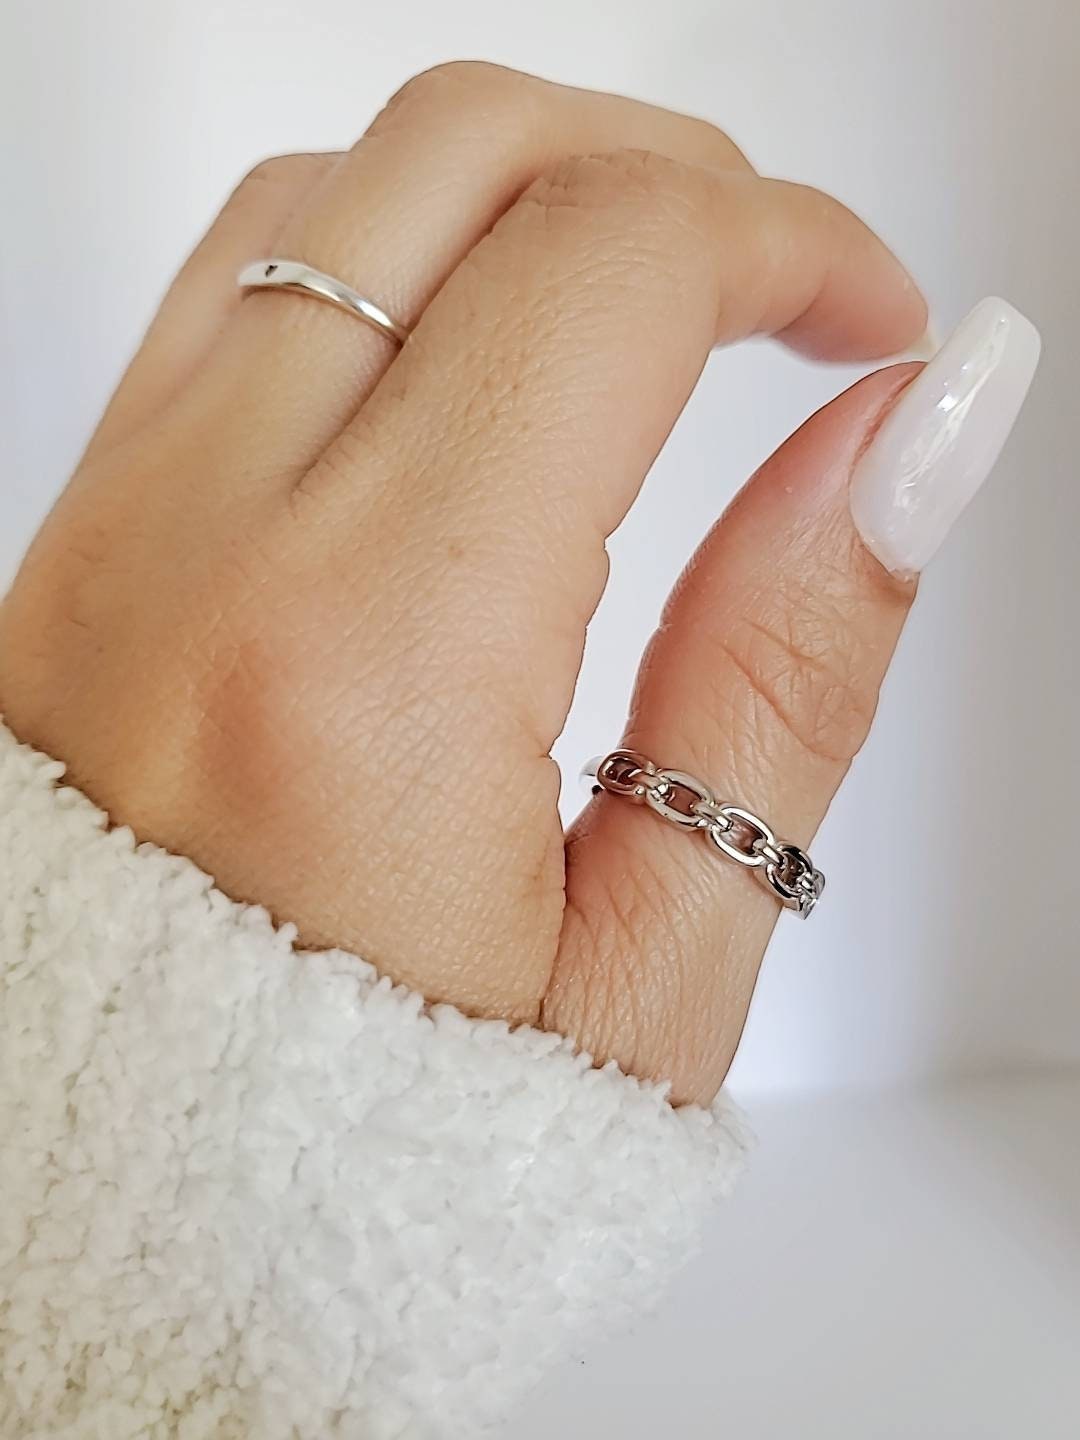 Sterling Silver Chain Ring, Simple Chain Band, Thumb Ring, Stacking Ring, Minimalist Ring, Women's Chain Ring, Gift Ideas, 925 Stamaped-0